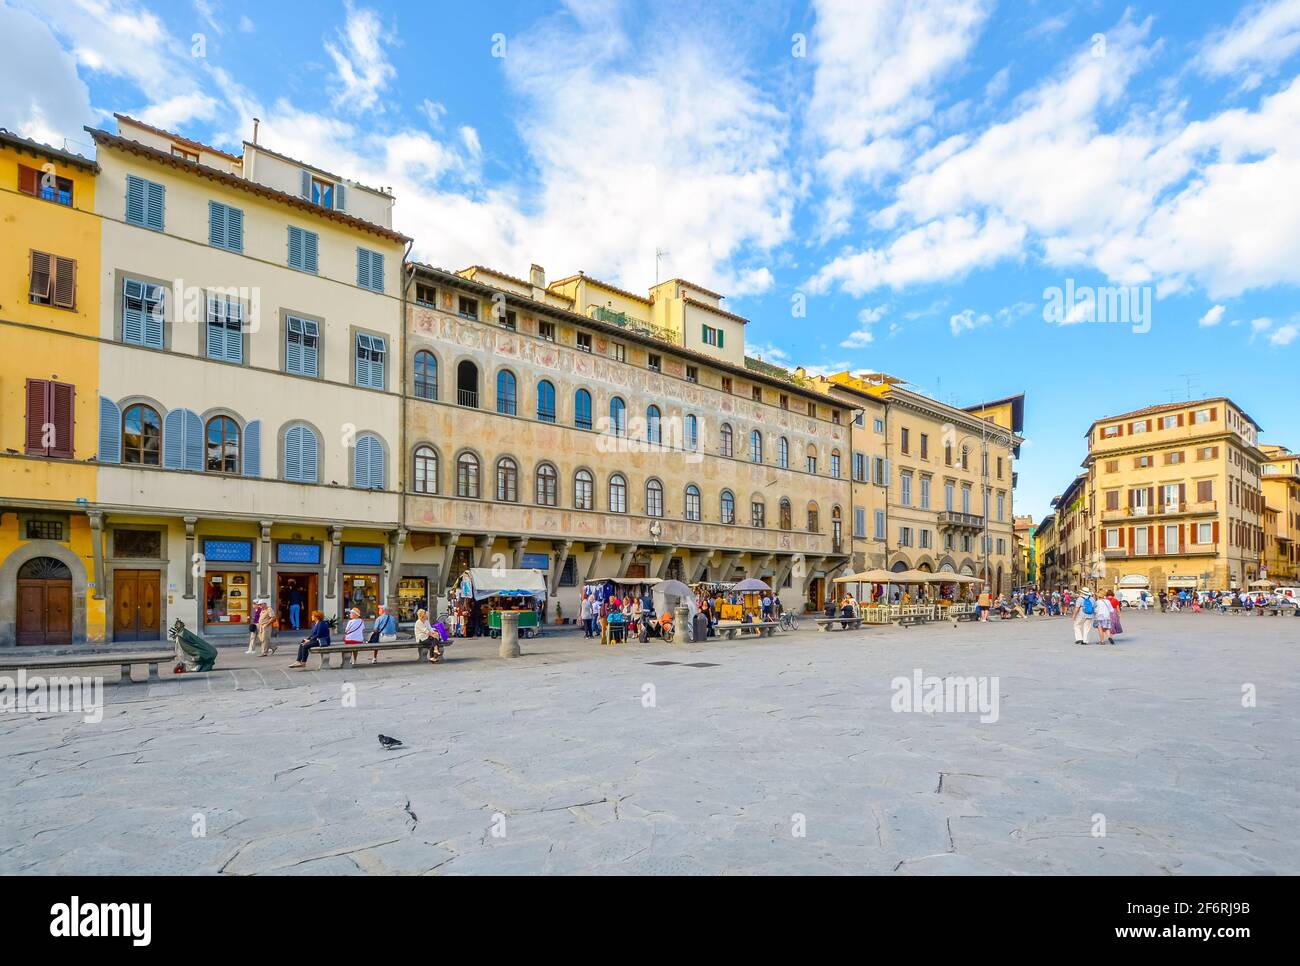 The piazza Santa Croce in Florence Italy taken from the steps of the Santa Croce Basilica Stock Photo